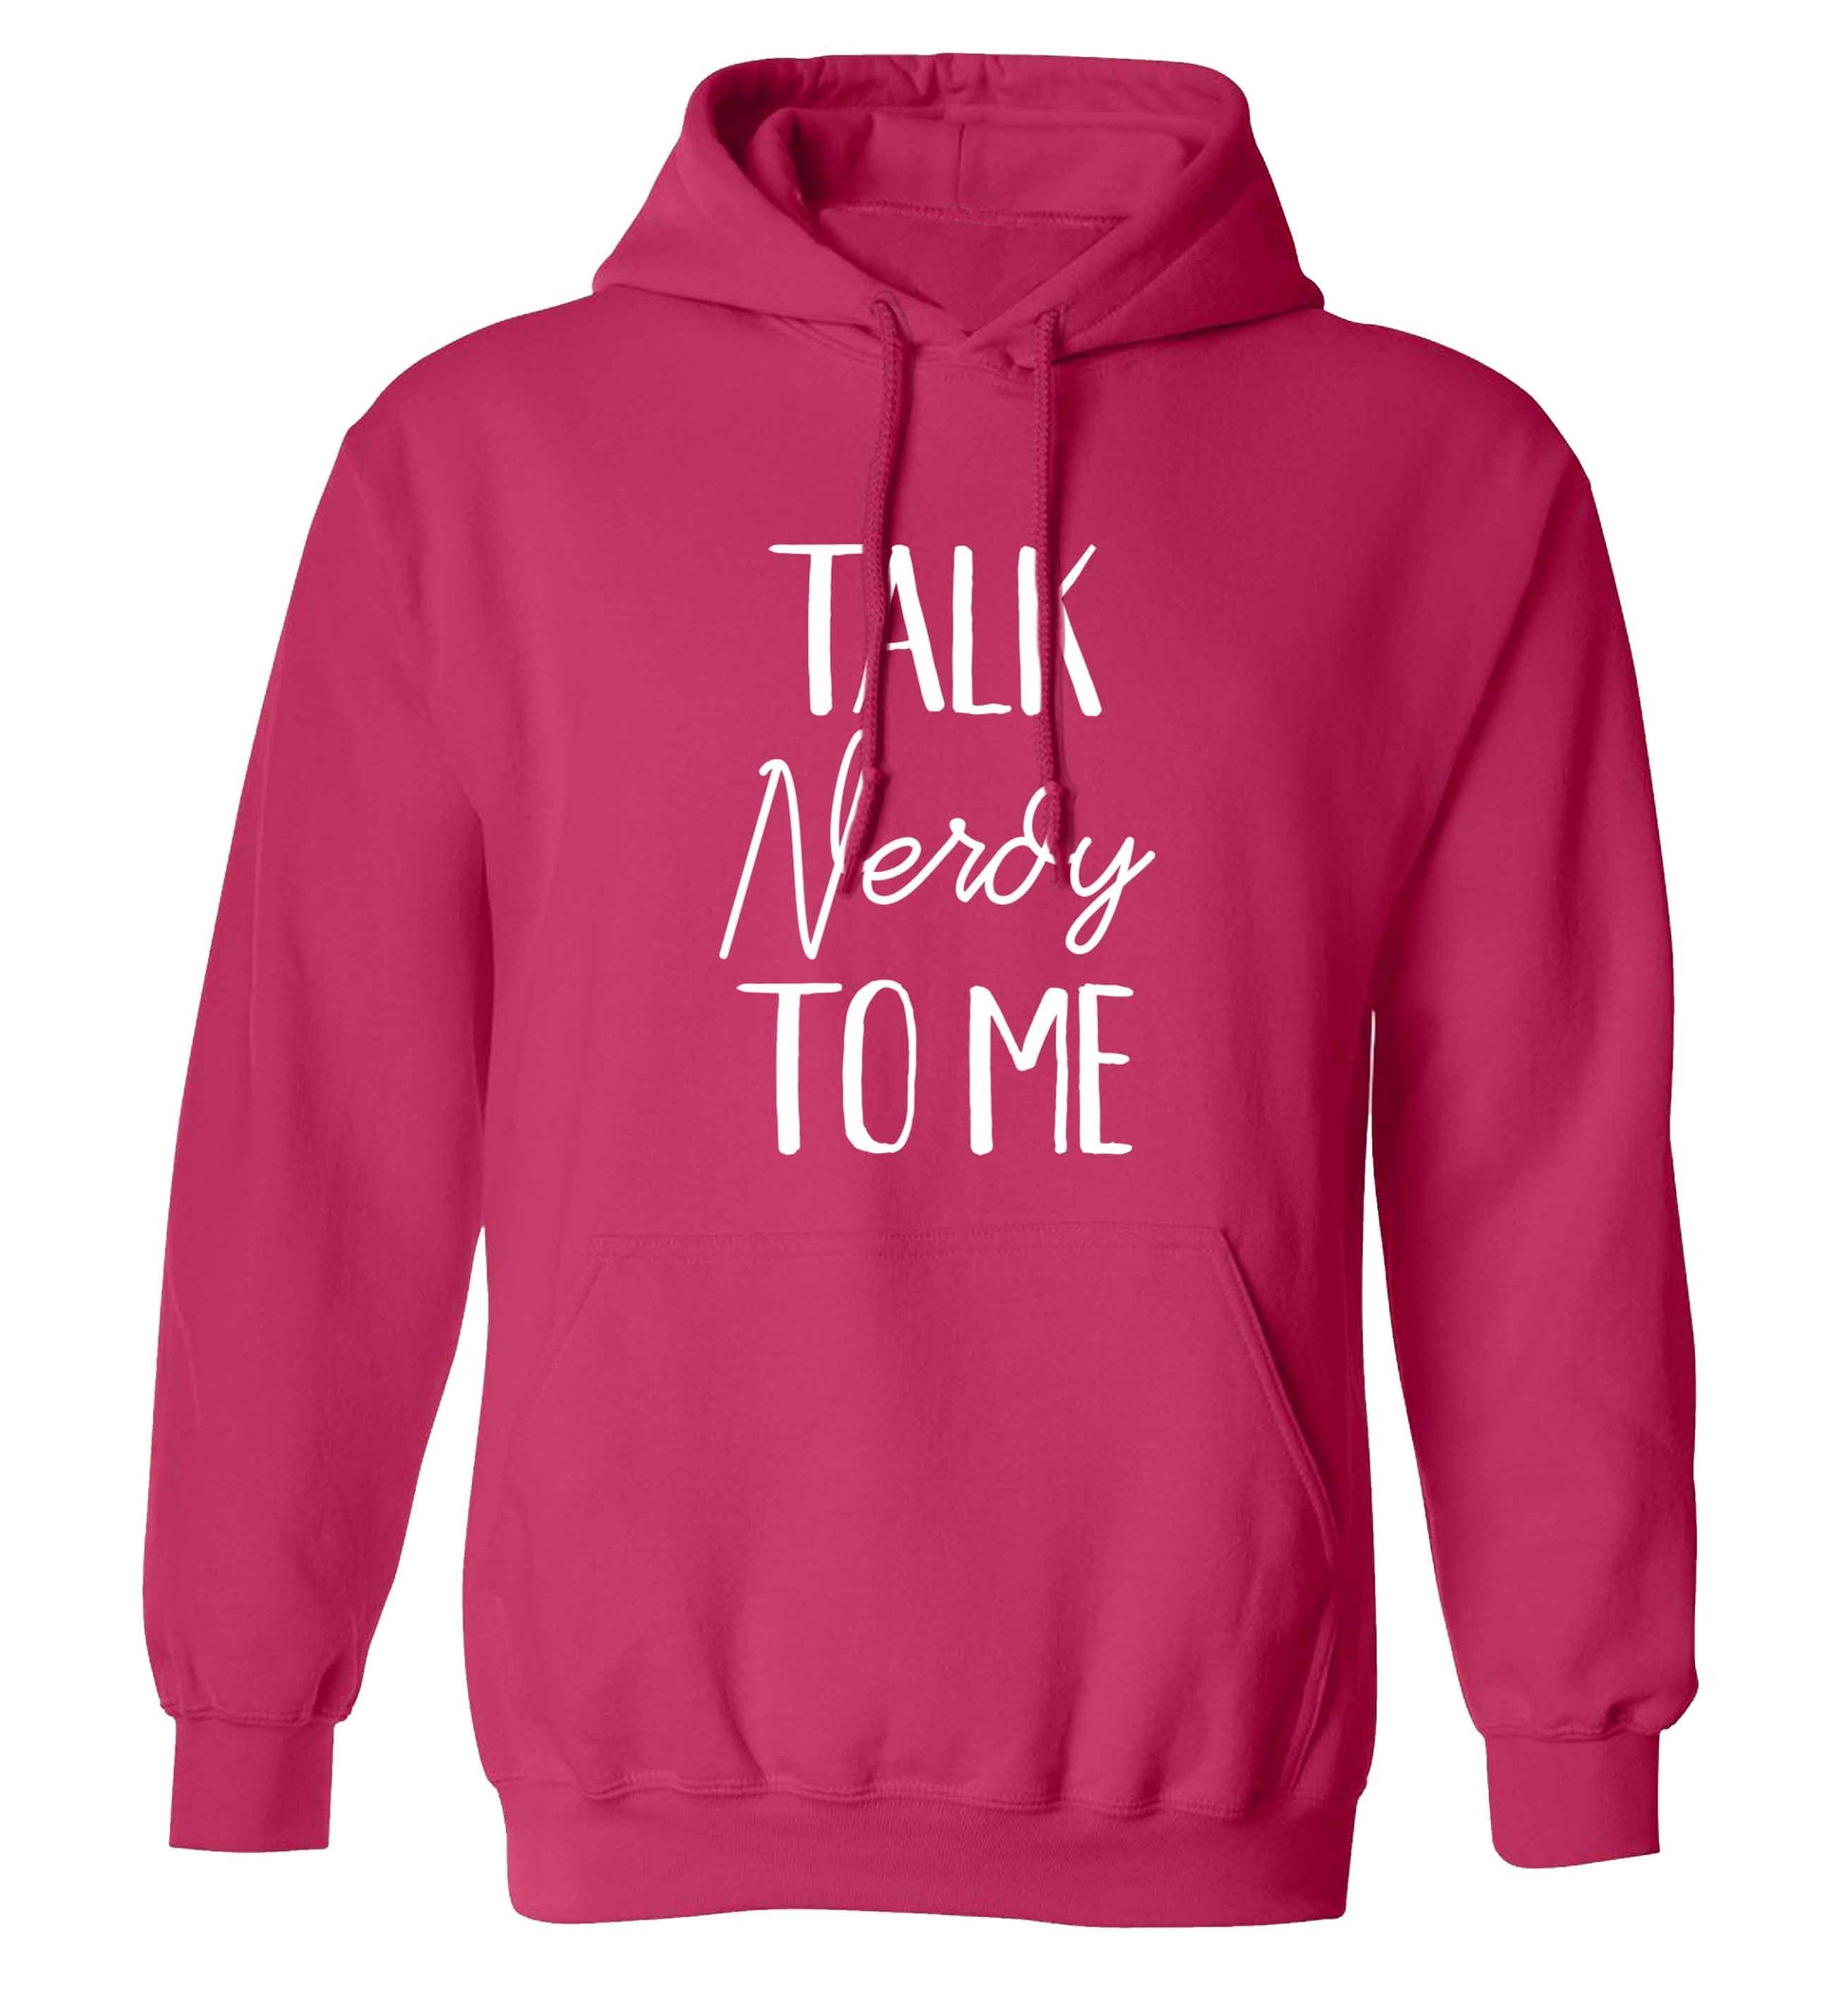 Talk nerdy to me adults unisex pink hoodie 2XL